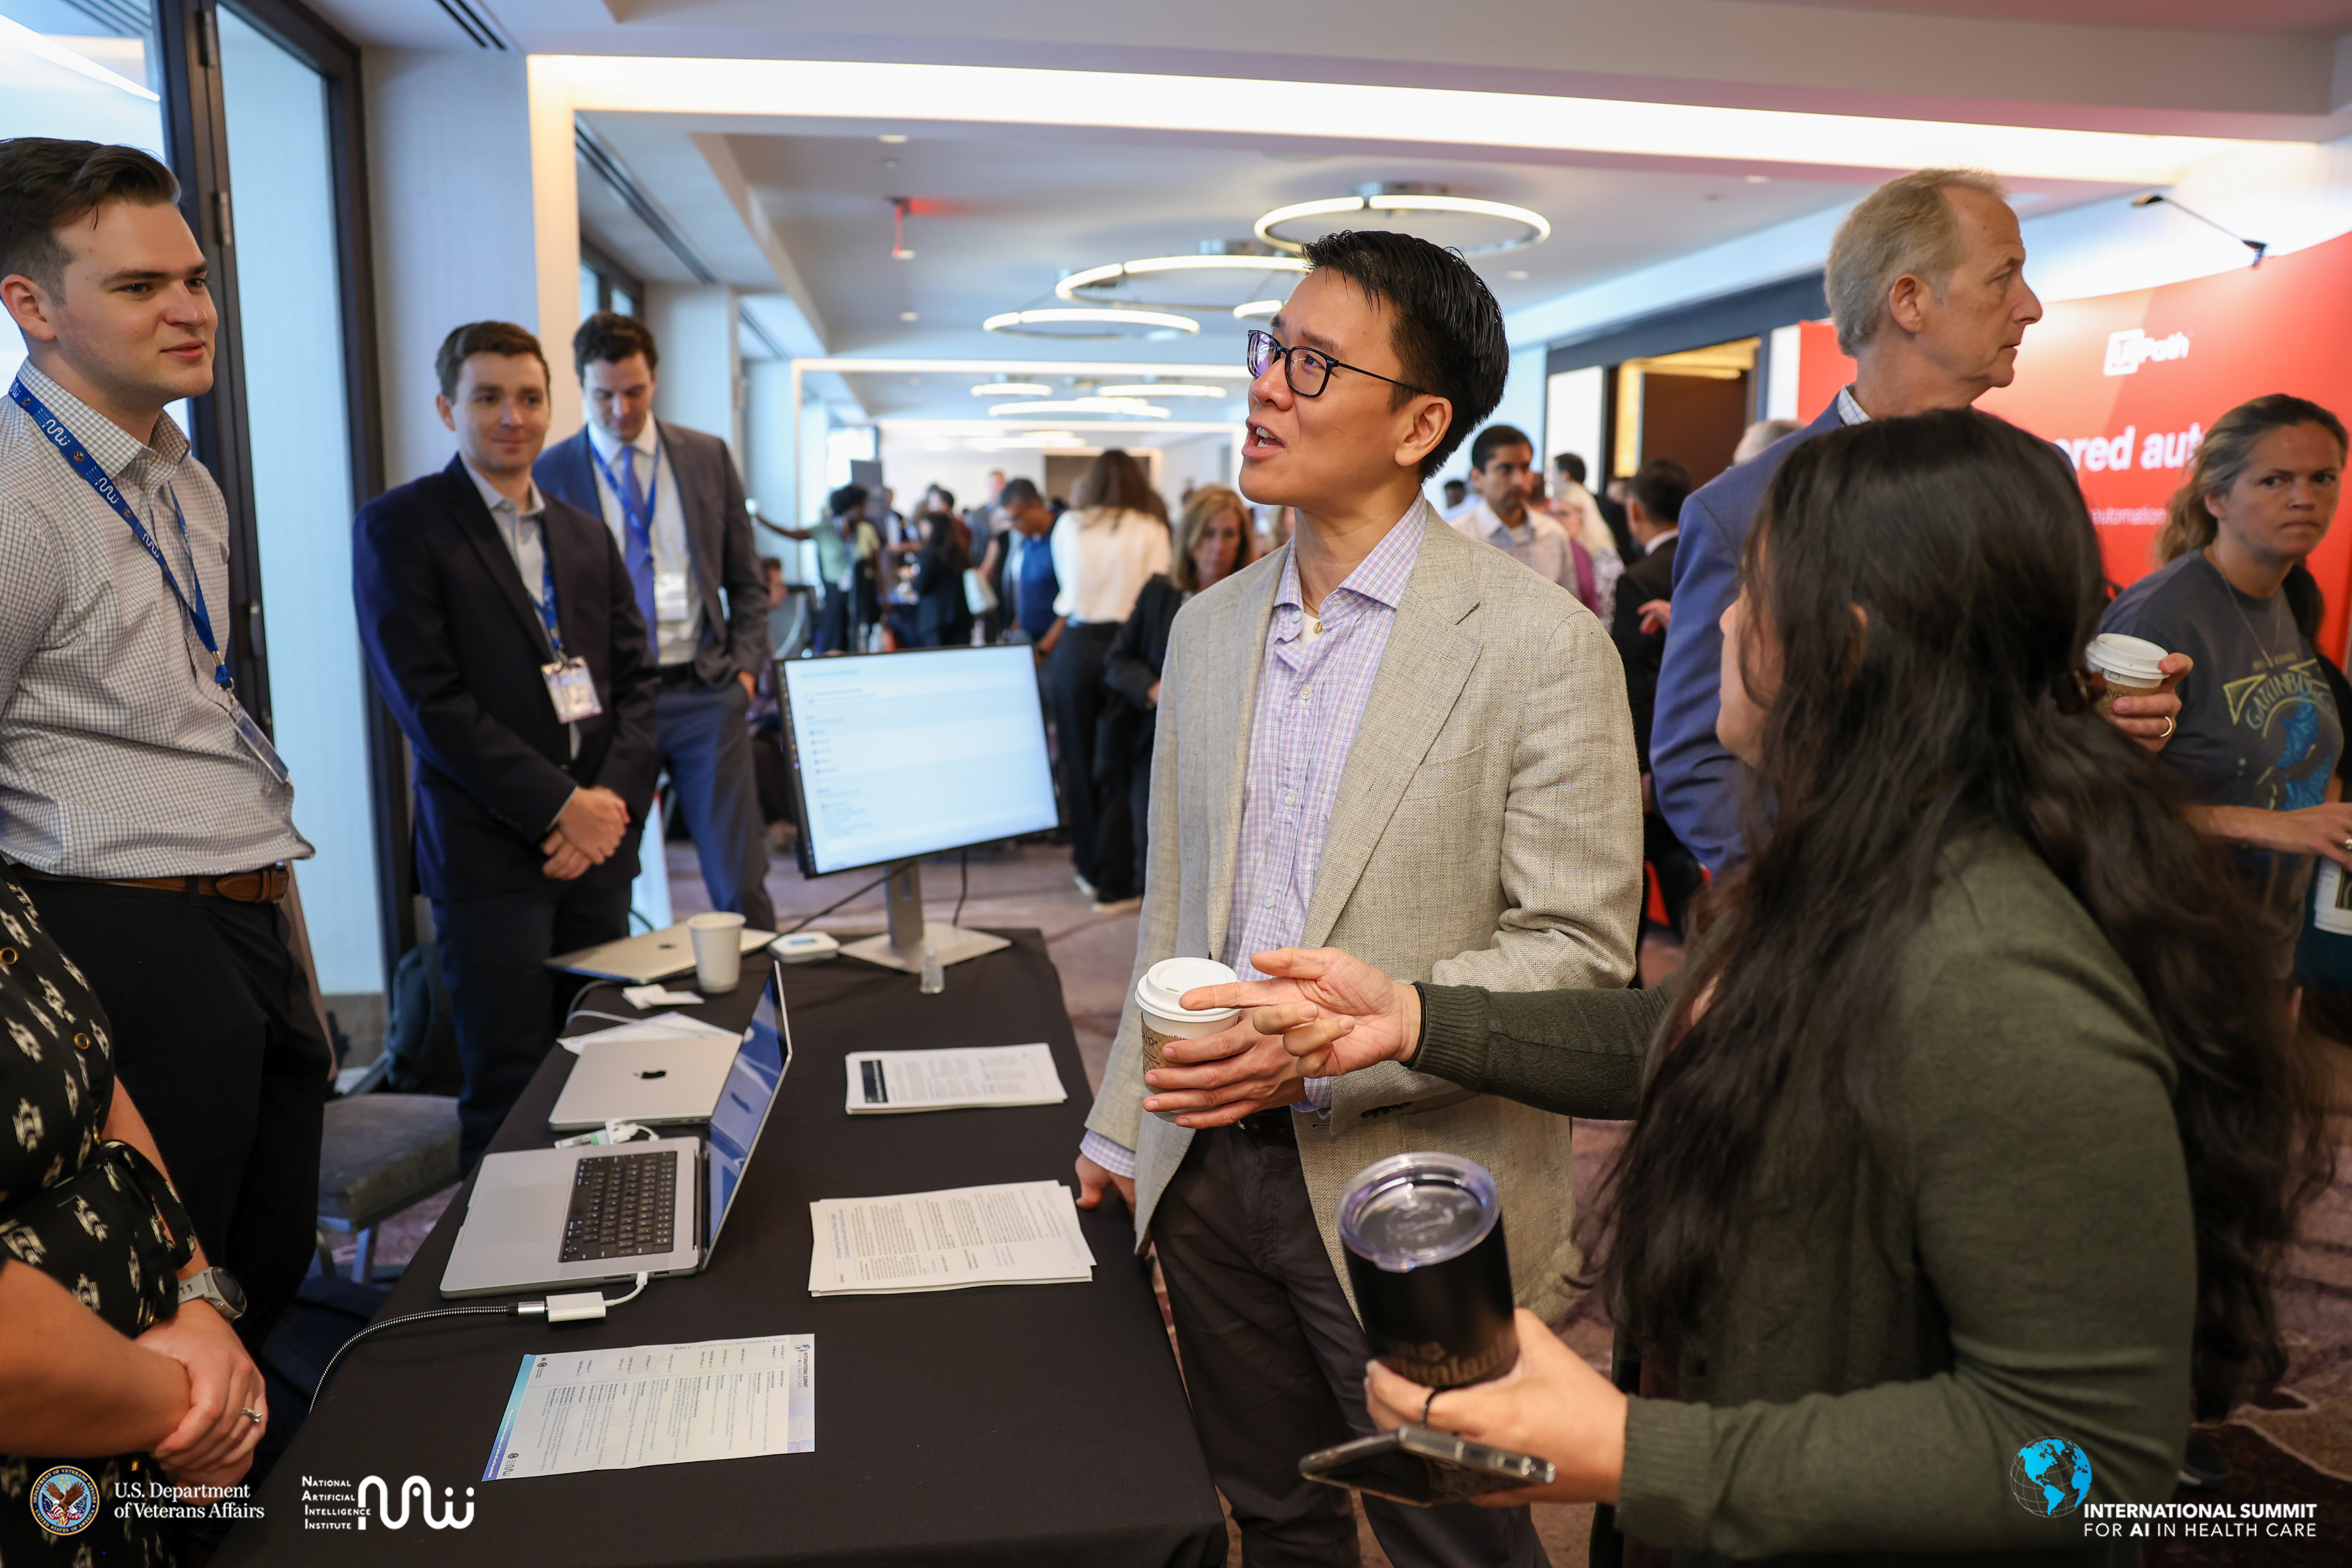 AI Summit attendees networking with exhibitors during coffee hour 